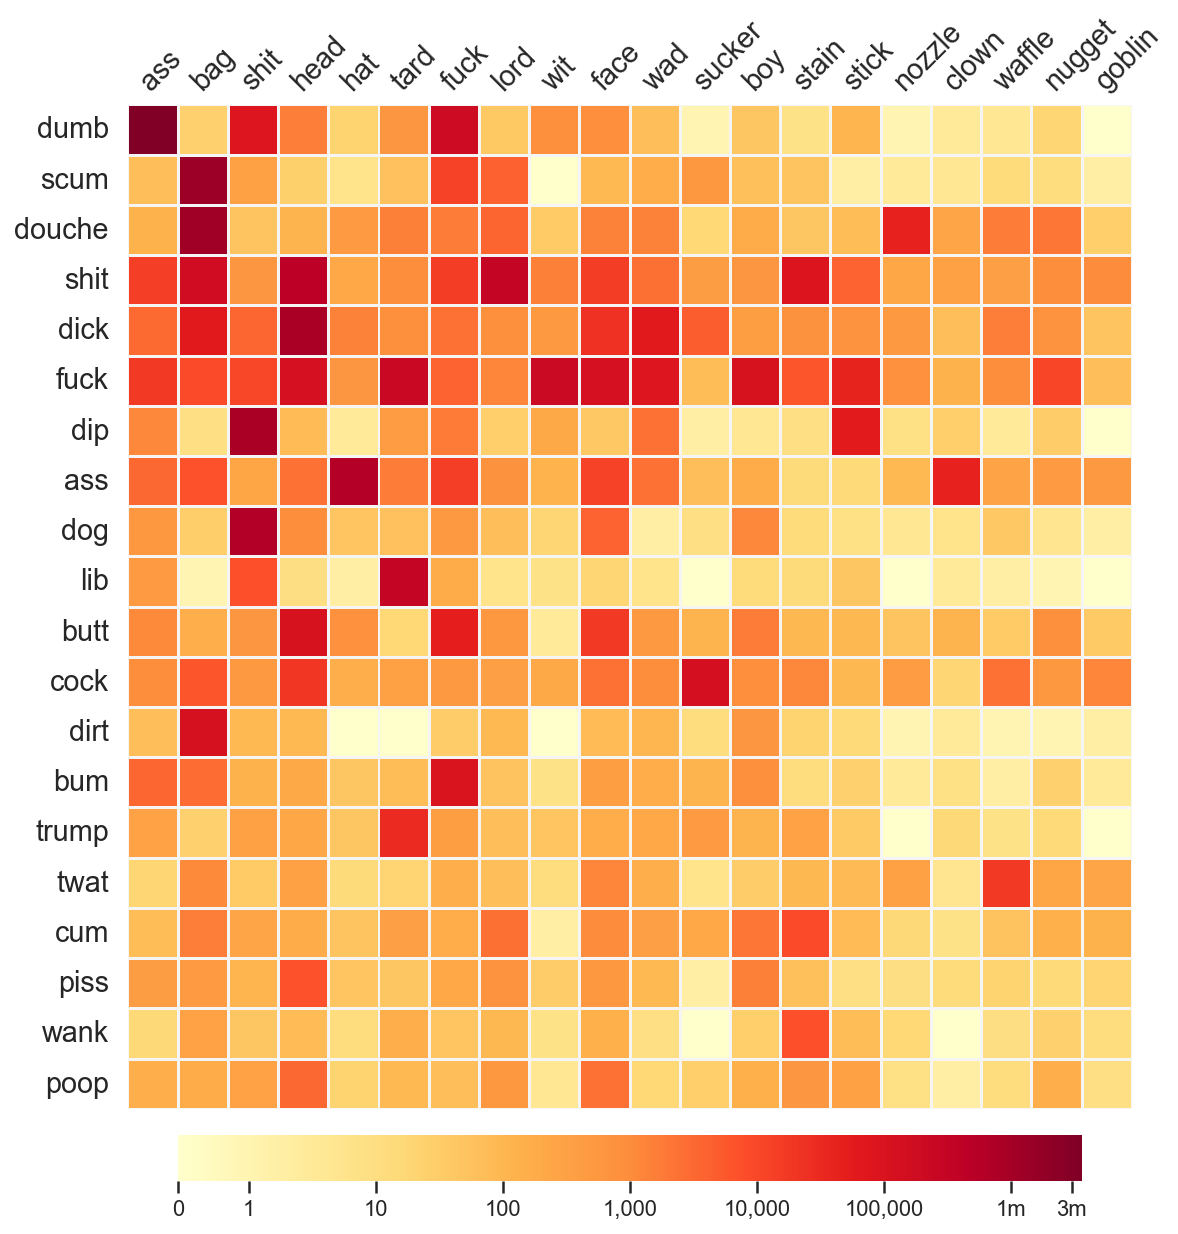 20x20 heatmap matrix showing the frequency of different combinations of prefixes and suffixes